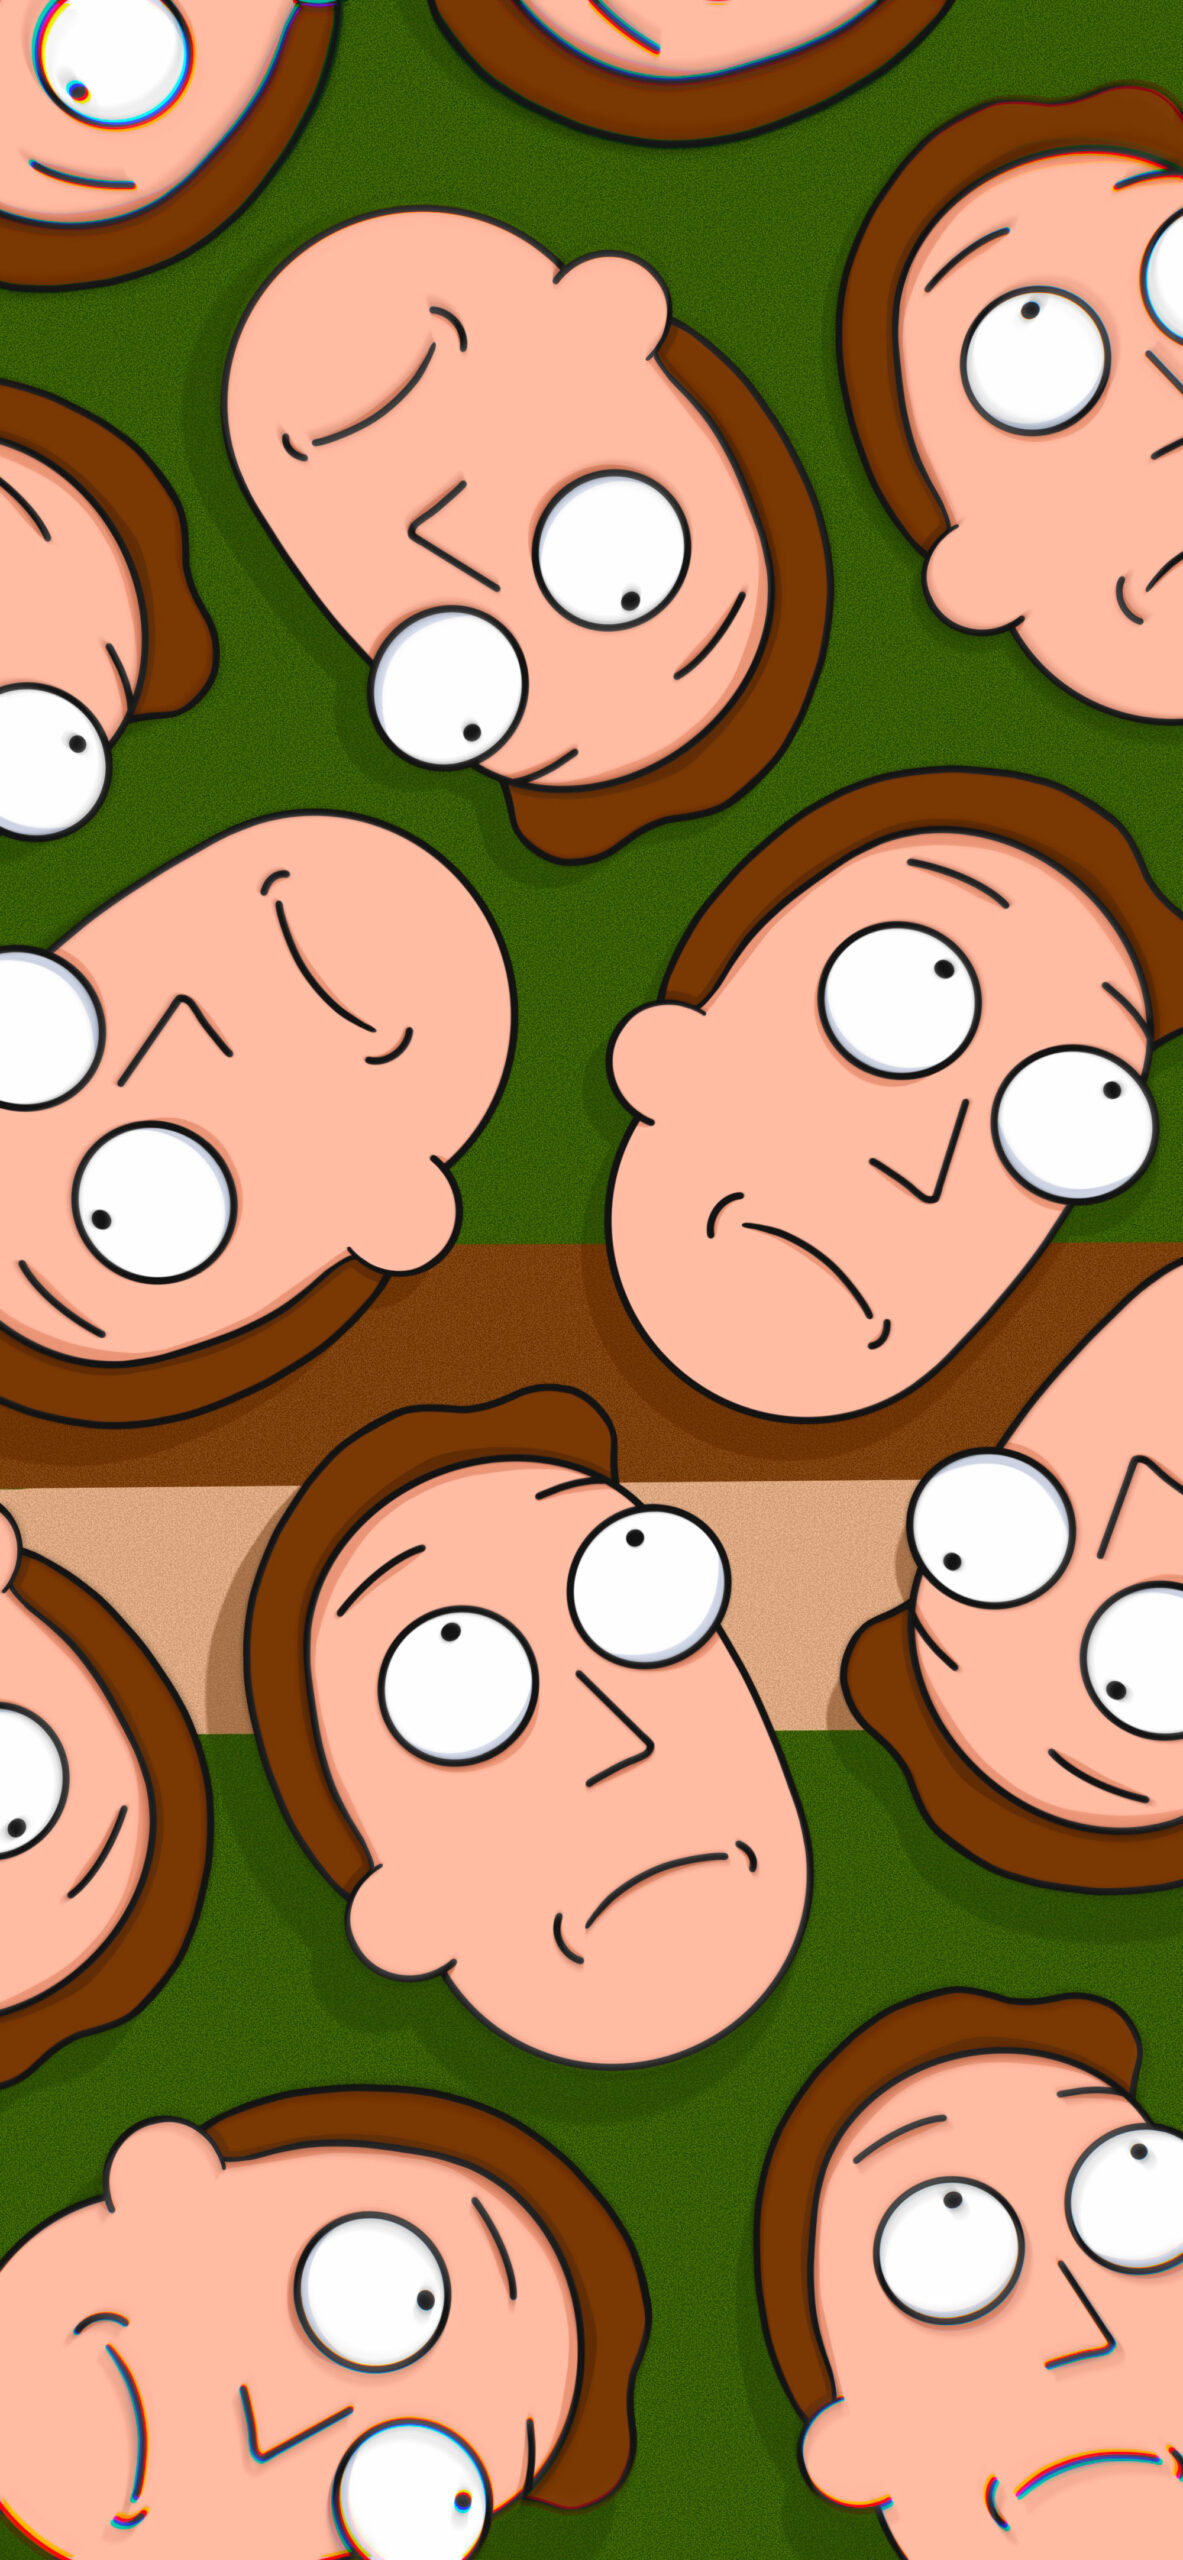 rick and morty jerry smith green wallpaper